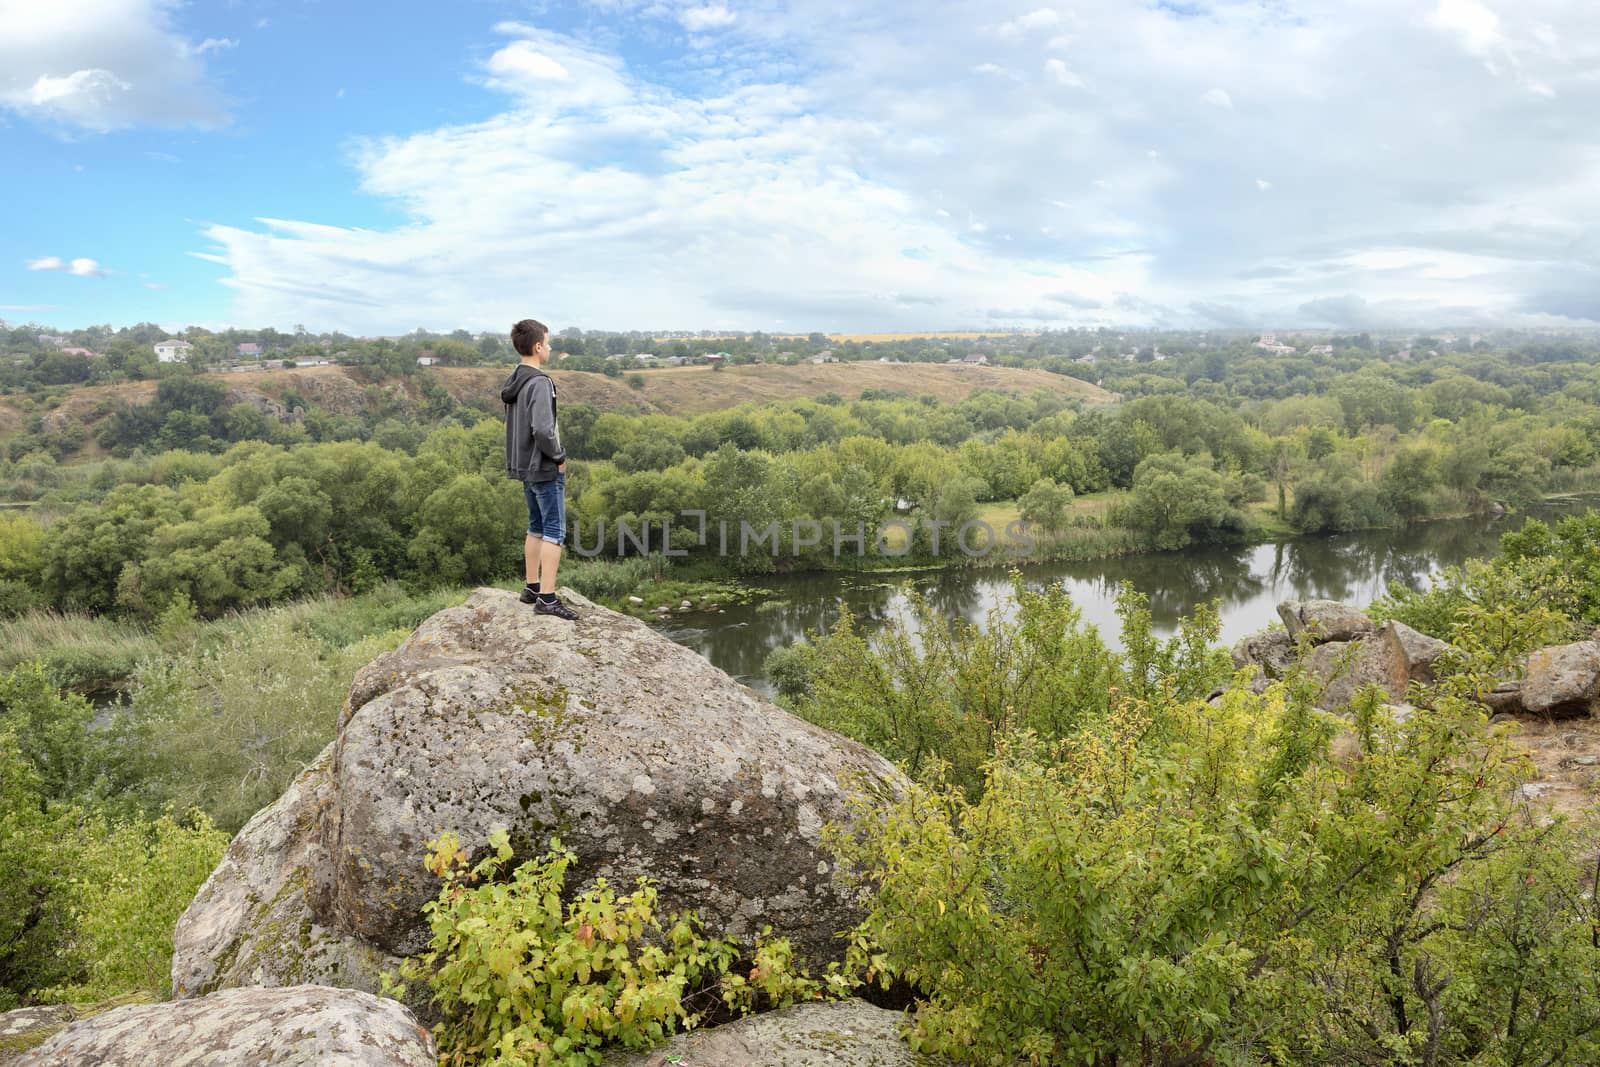 The teenager stands on top of a large stone boulder on the bank of the South Bug River and looks at the river below. The river Southern Bug in the summer - river flow, rocky shores, bright green vegetation and a cloudy blue sky